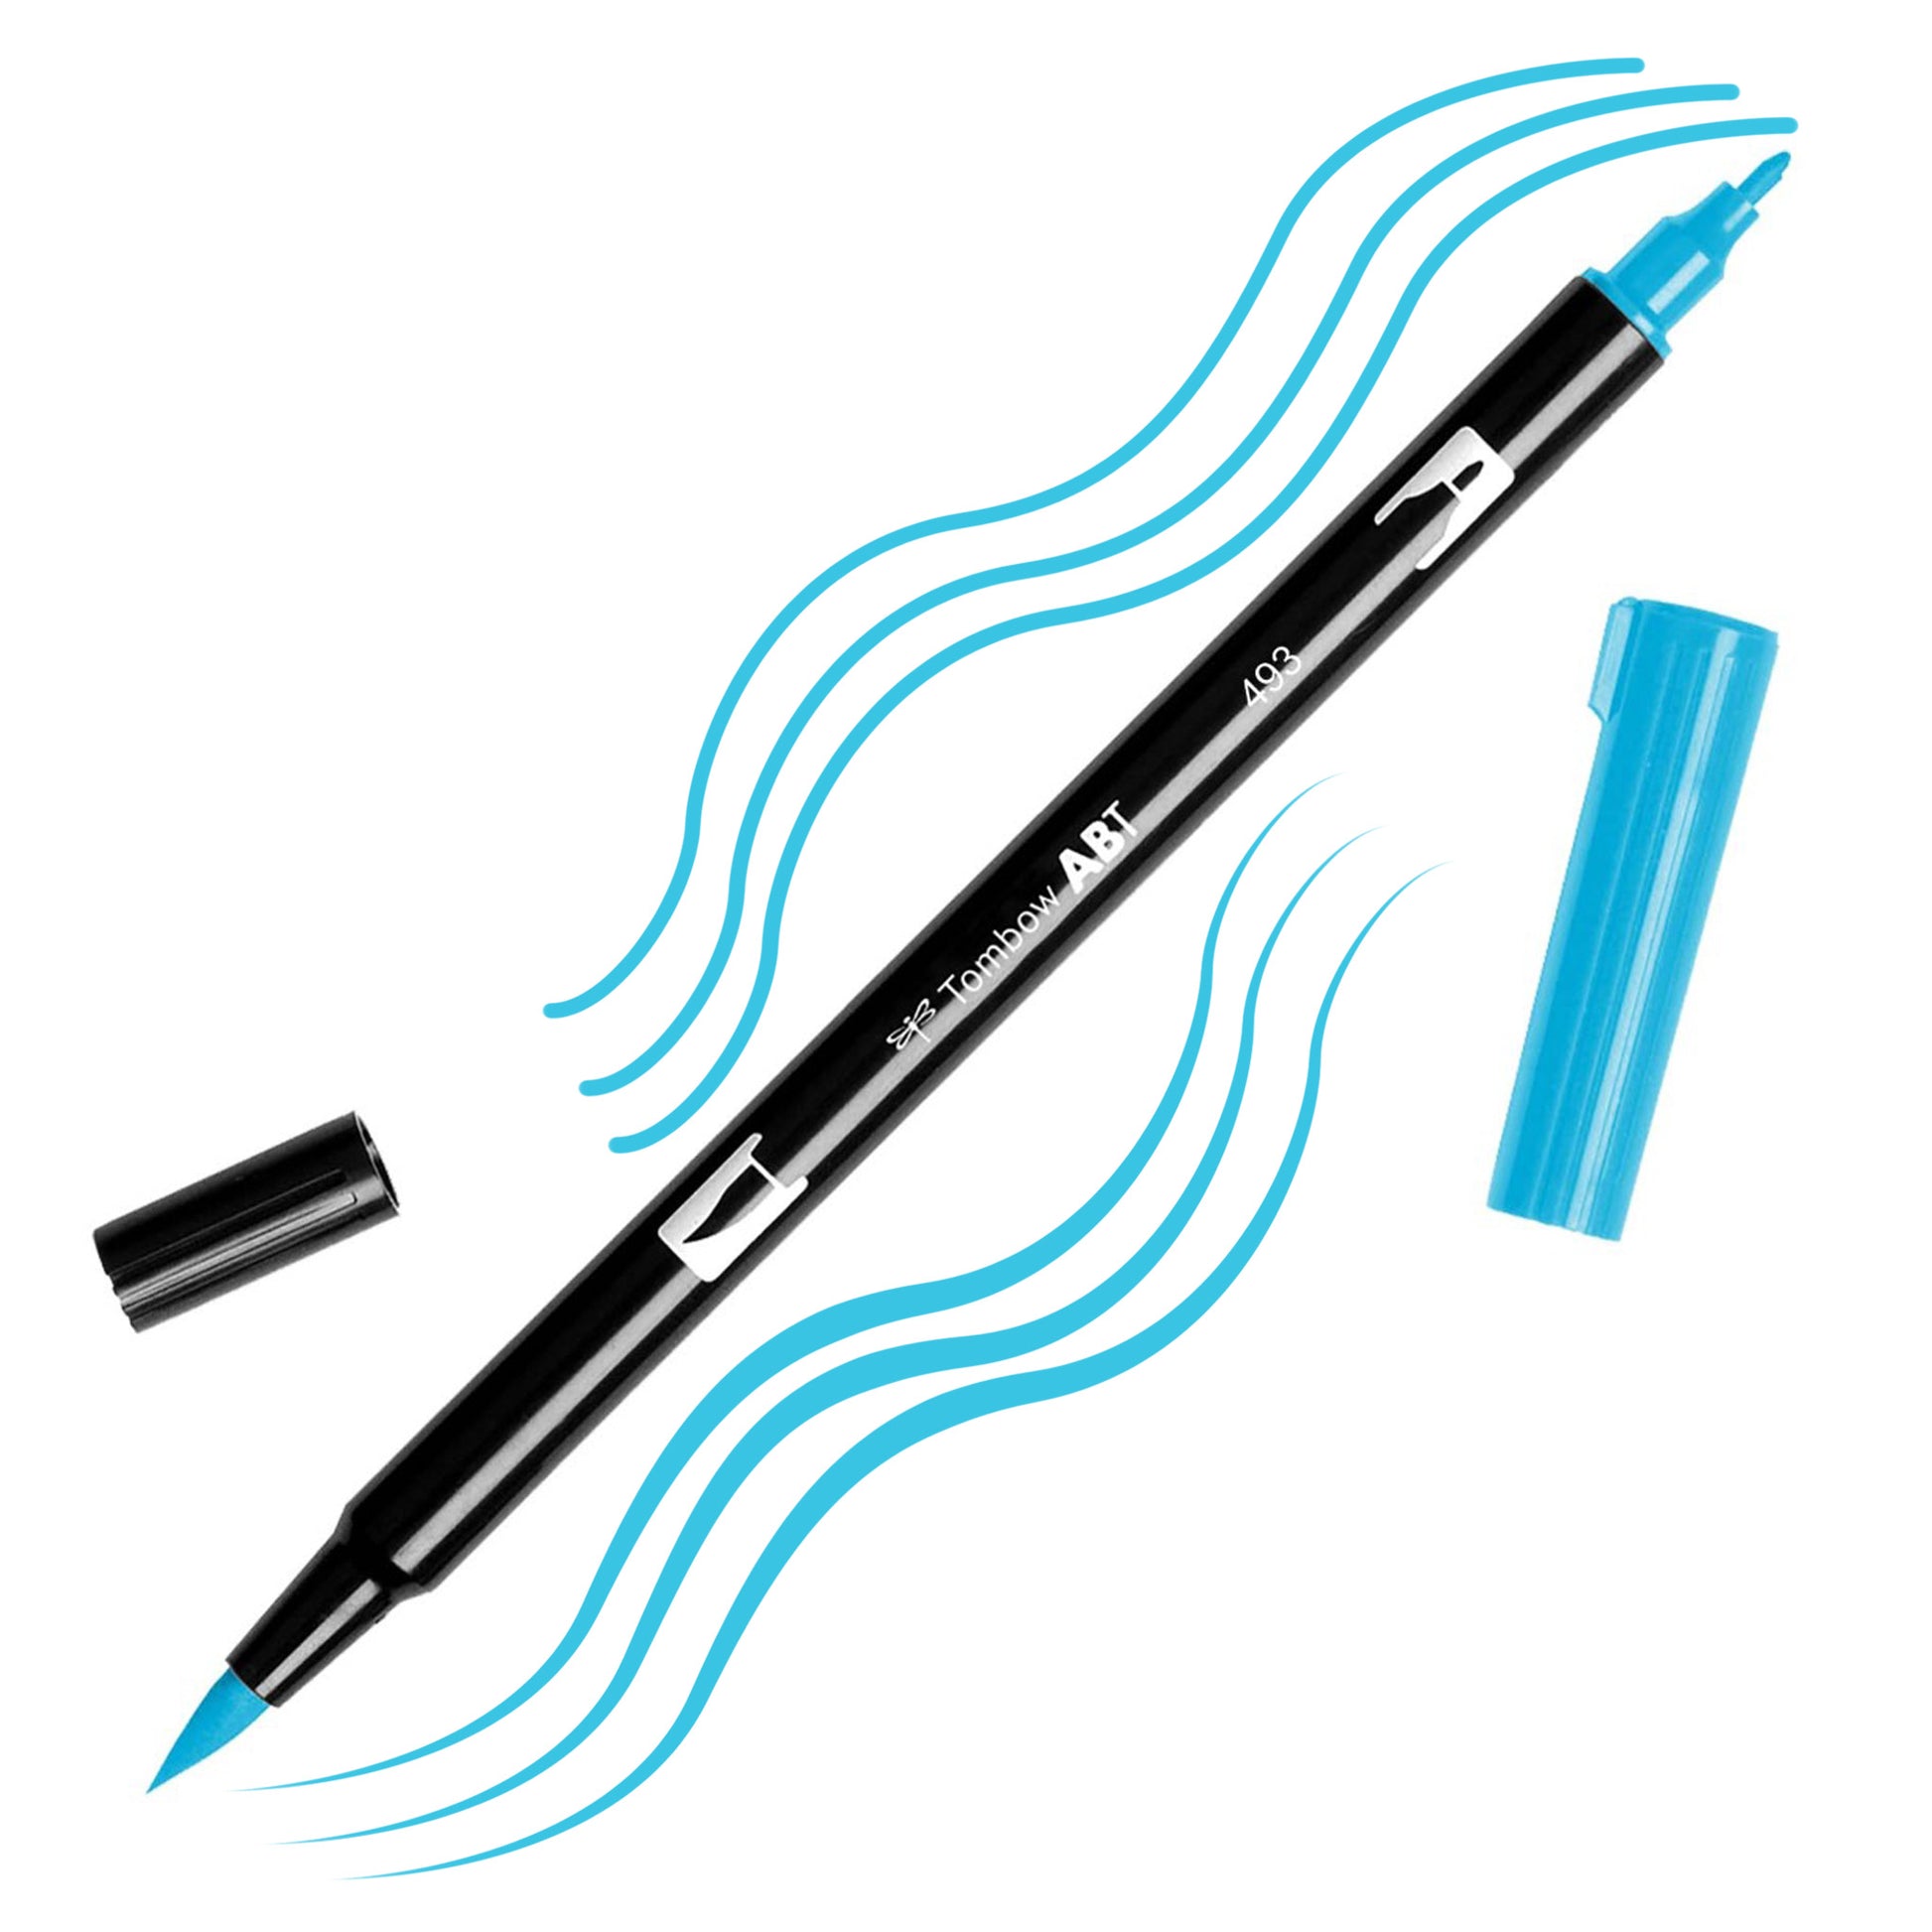 Reflex Blue Tombow double-headed brush-pen with a flexible nylon fiber brush tip and a fine tip against a white background with Reflex Blue strokes